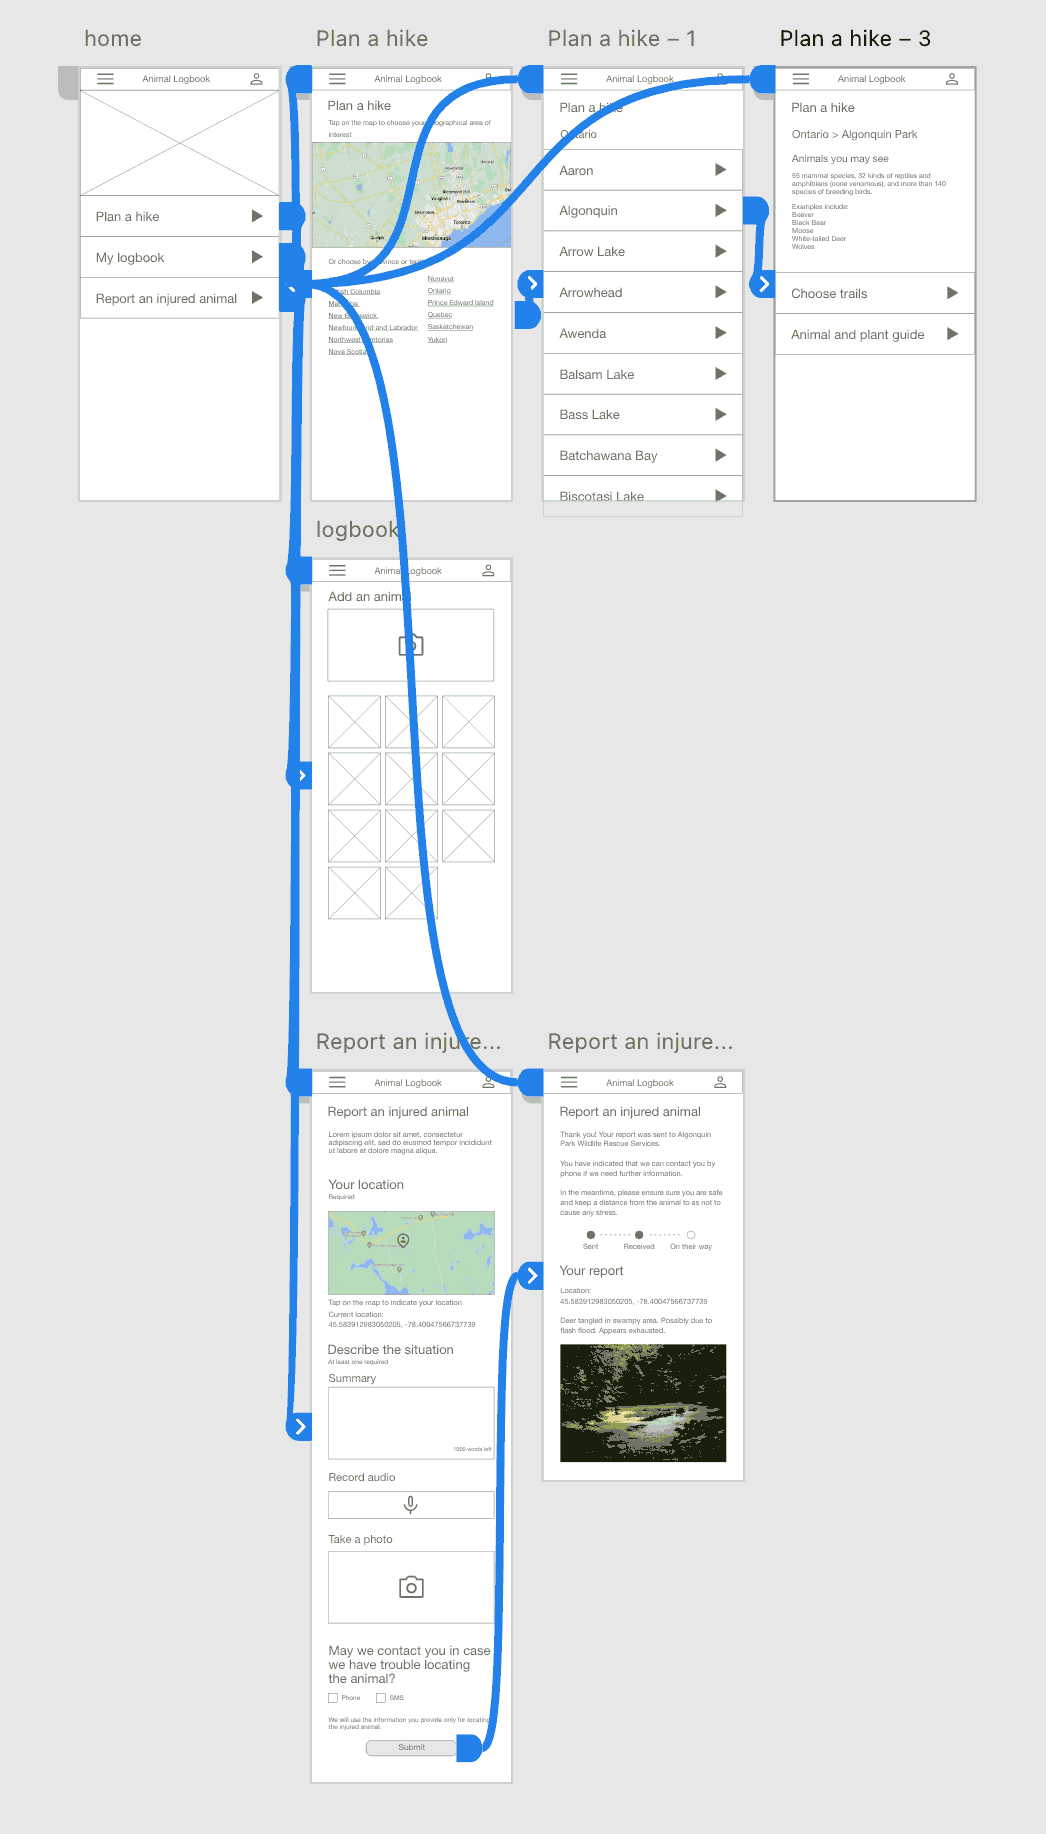 Wireframe mockups of various screens of a mobile app connected by blue lines denoting the user journey.